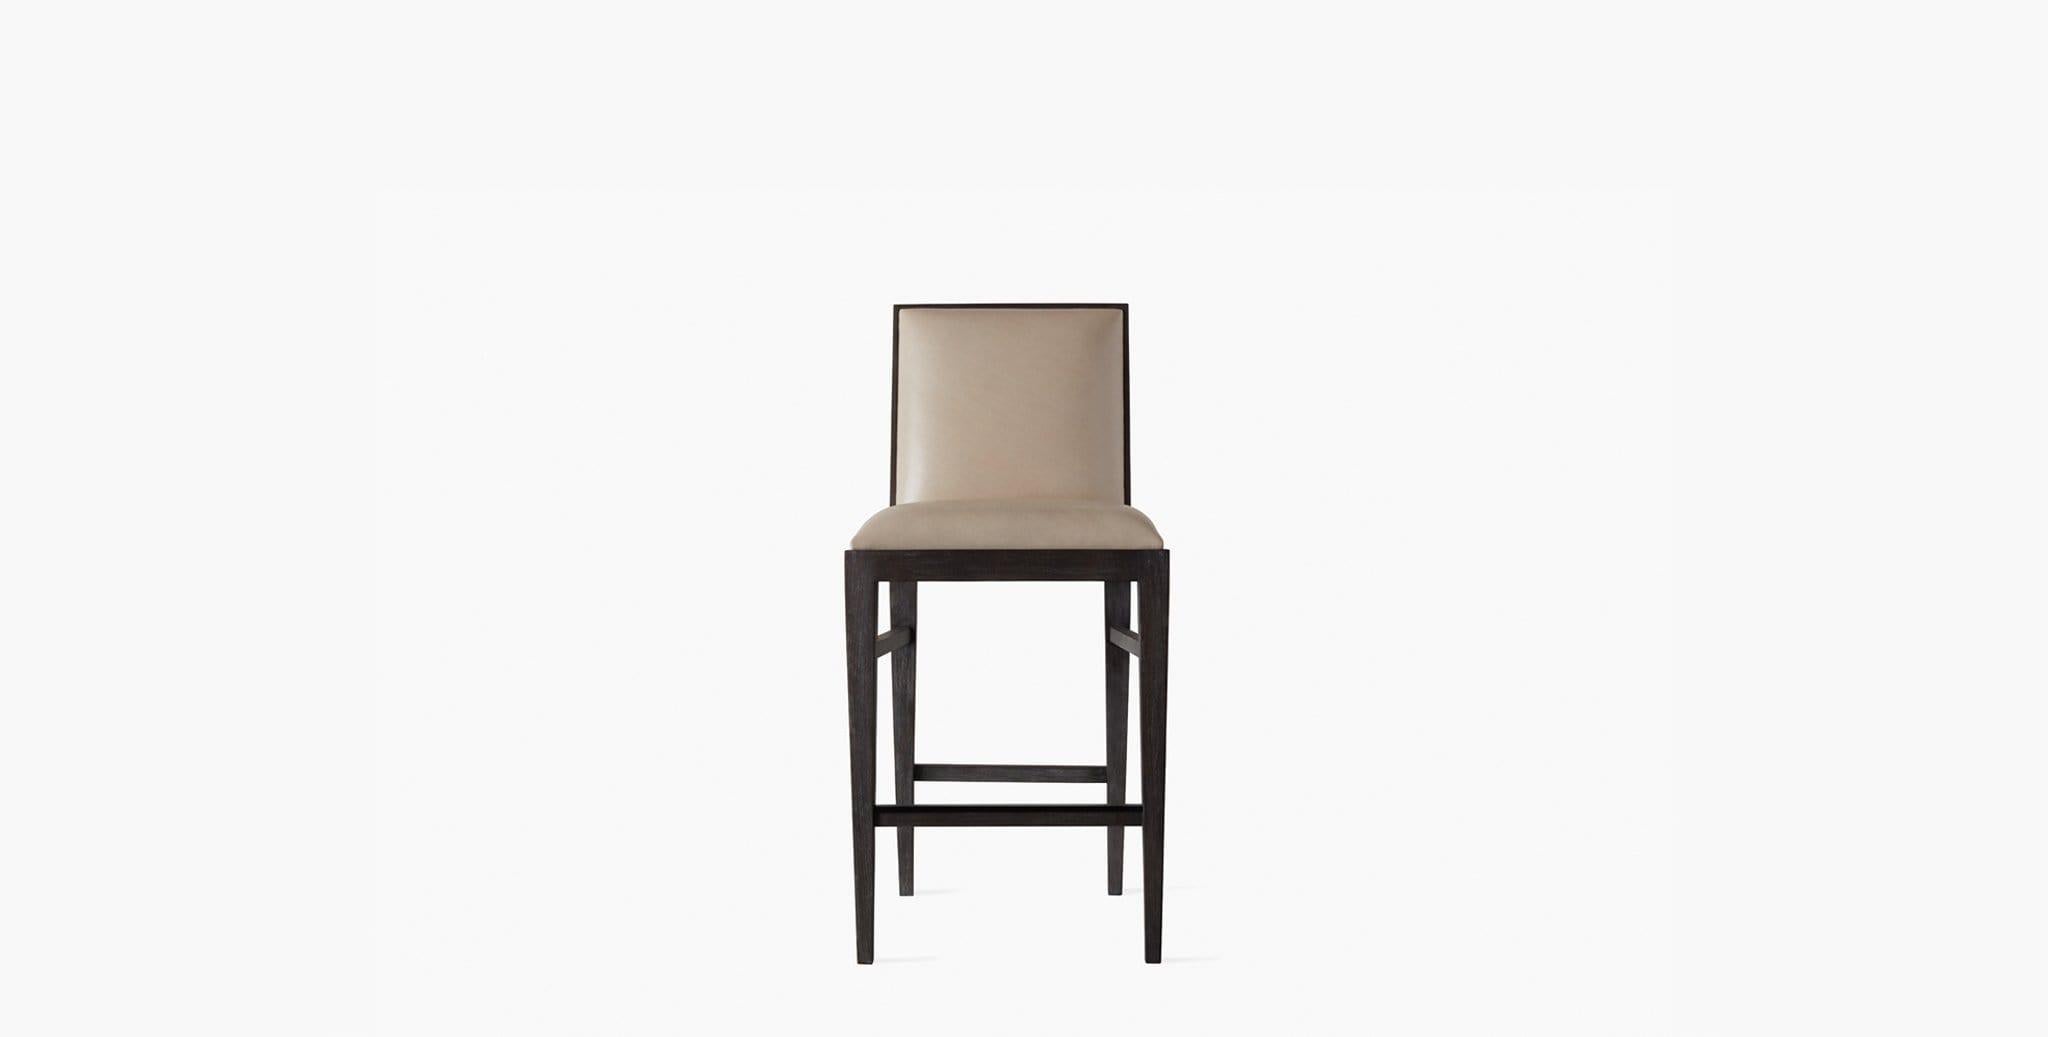 Our Landon Counter Stool has tailored upholstery in our signature leathers and velvet, along with weathered black oak tapered legs. Our handcrafted fabrics, leathers, and finishes are inspired by the natural variations within fibers, textures, and